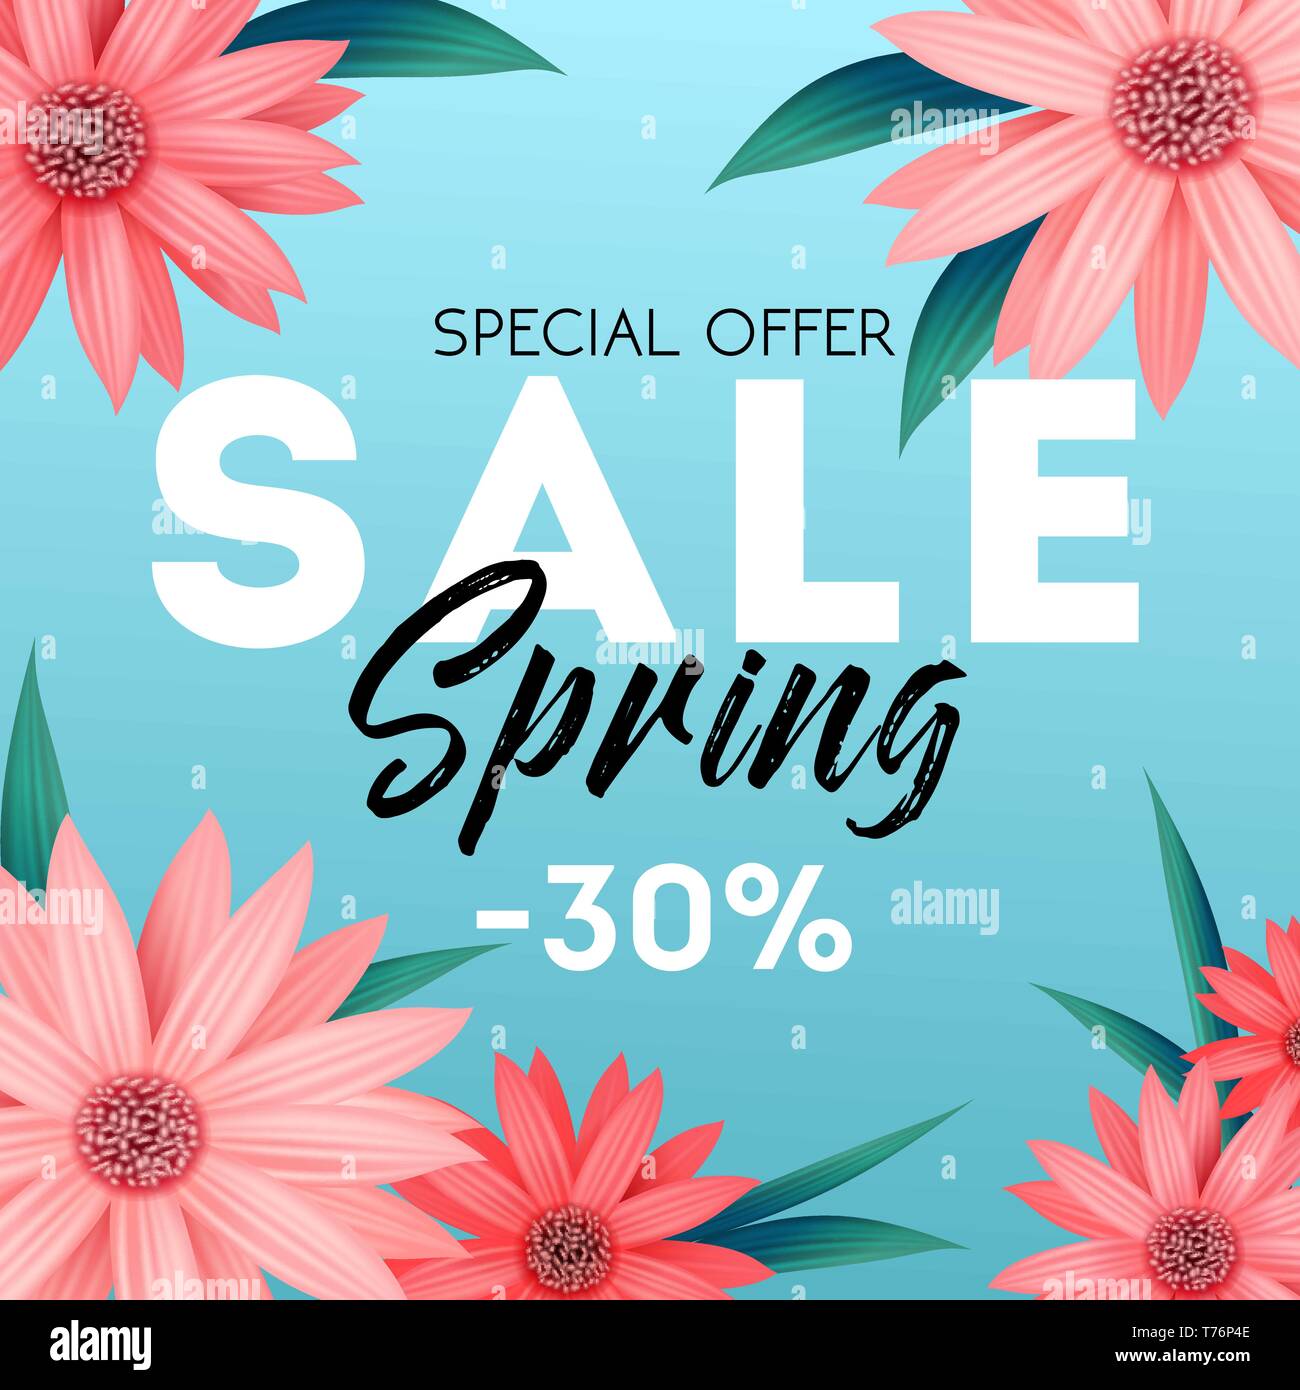 Spring sale banner, special offer, advertising with pink flowers Stock Vector